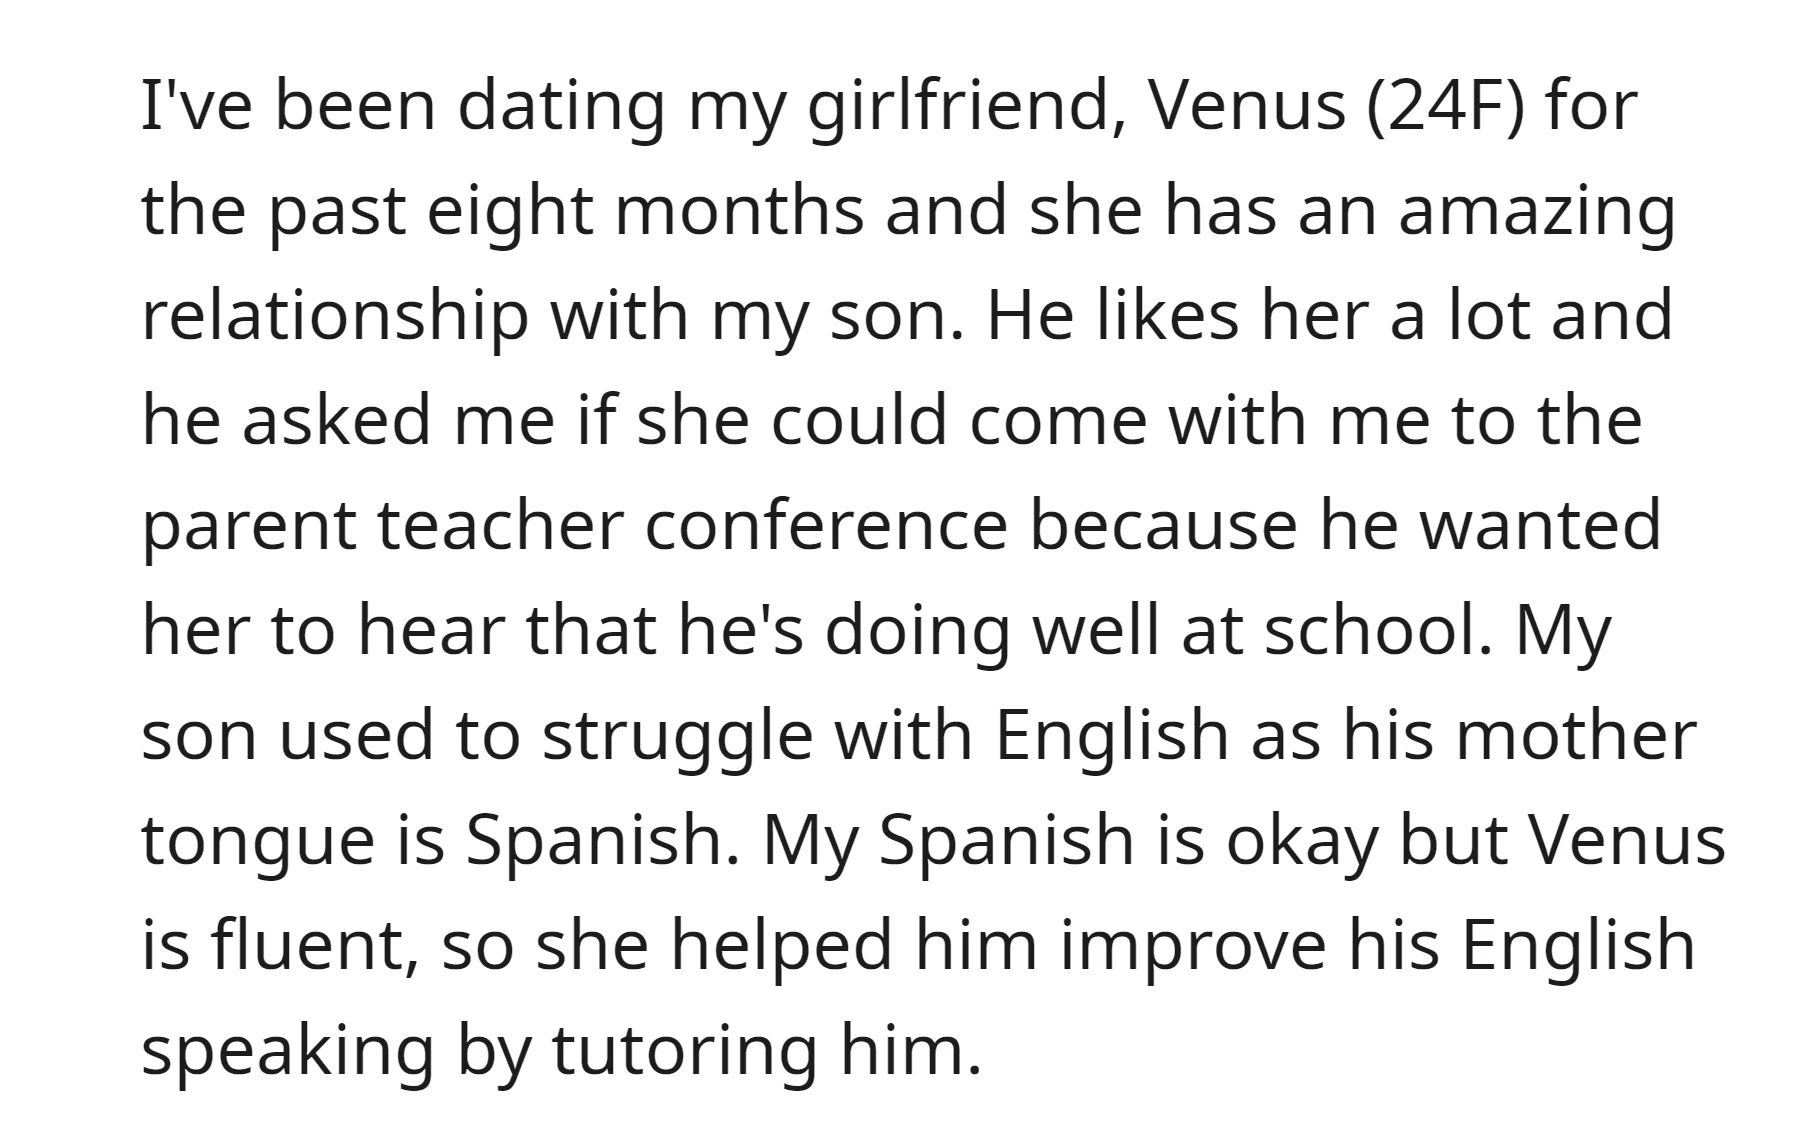 OP's girlfriend has been invited by his son to attend the parent-teacher conference for the first time